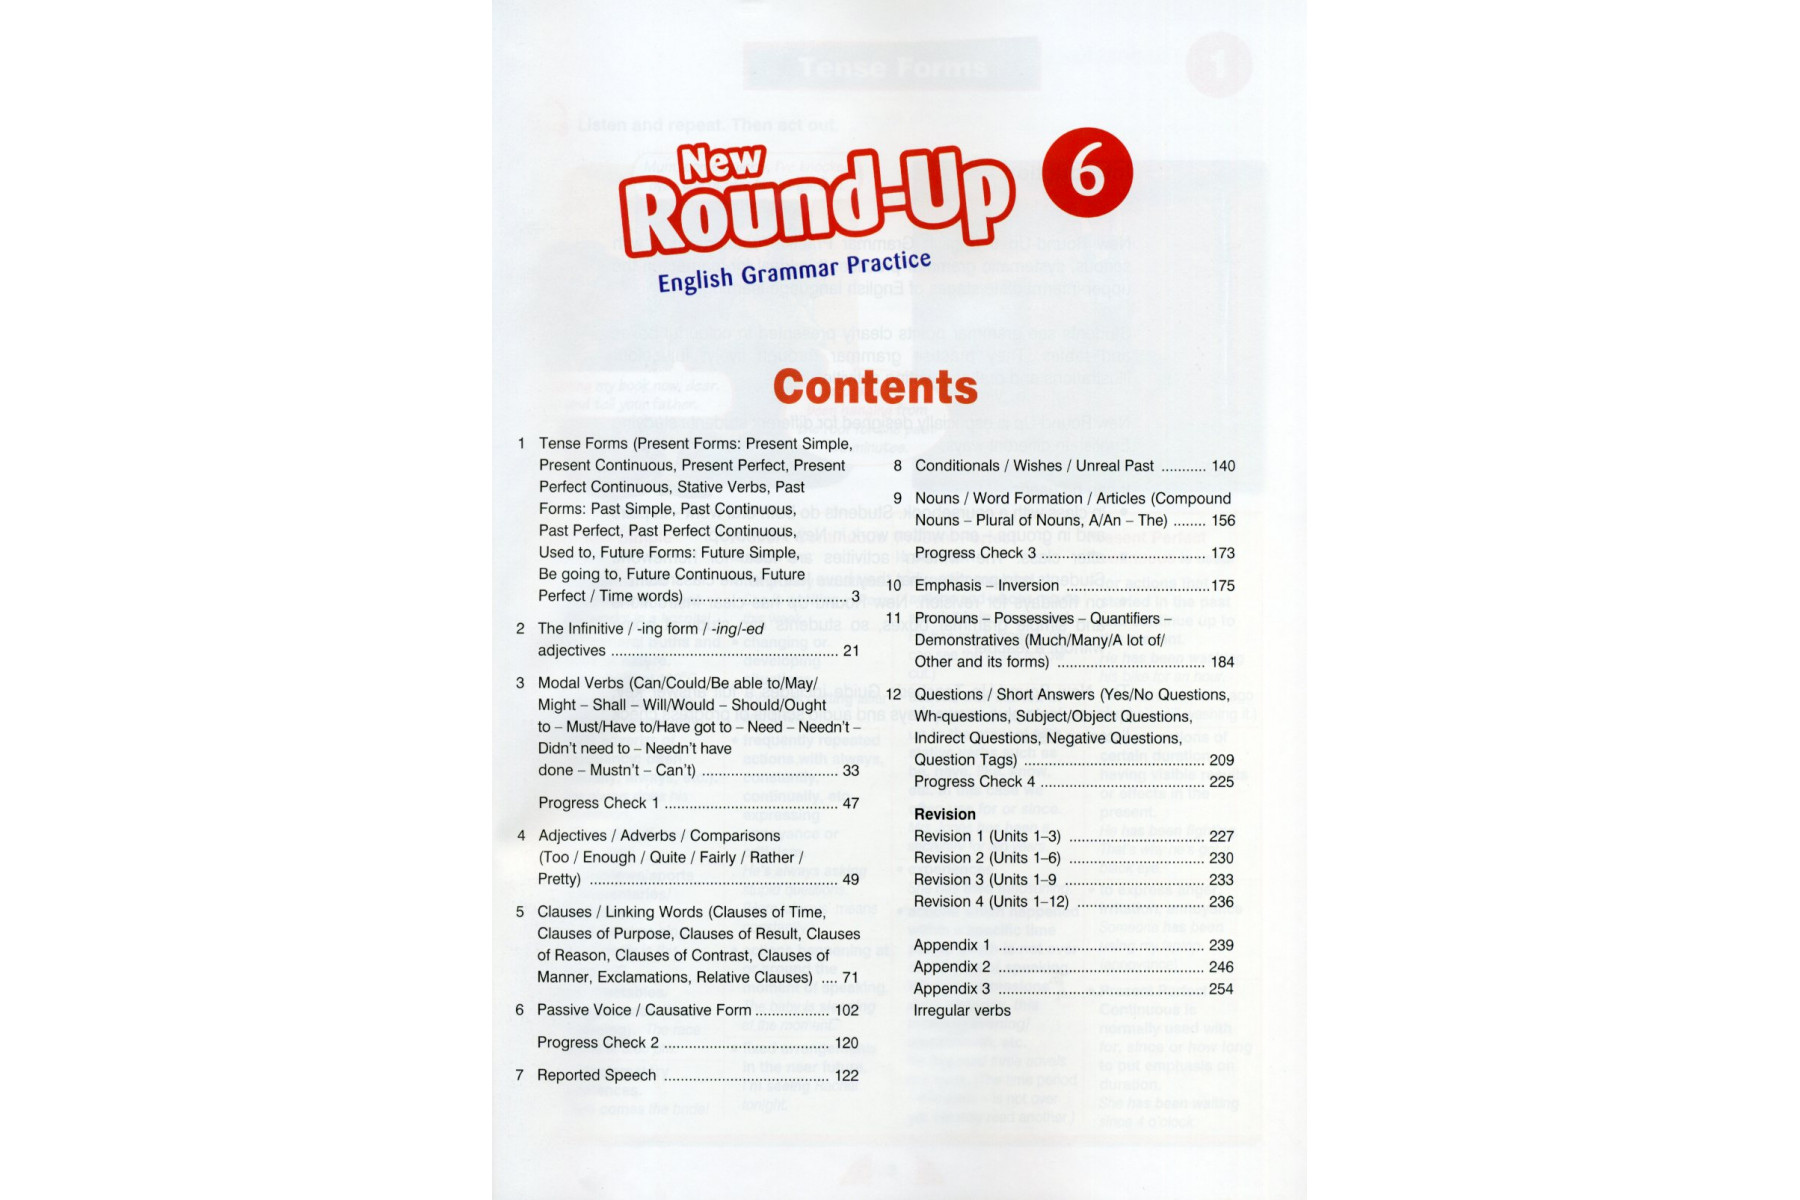 Round Up 6 NEW Students' Book with CD-ROM Pack